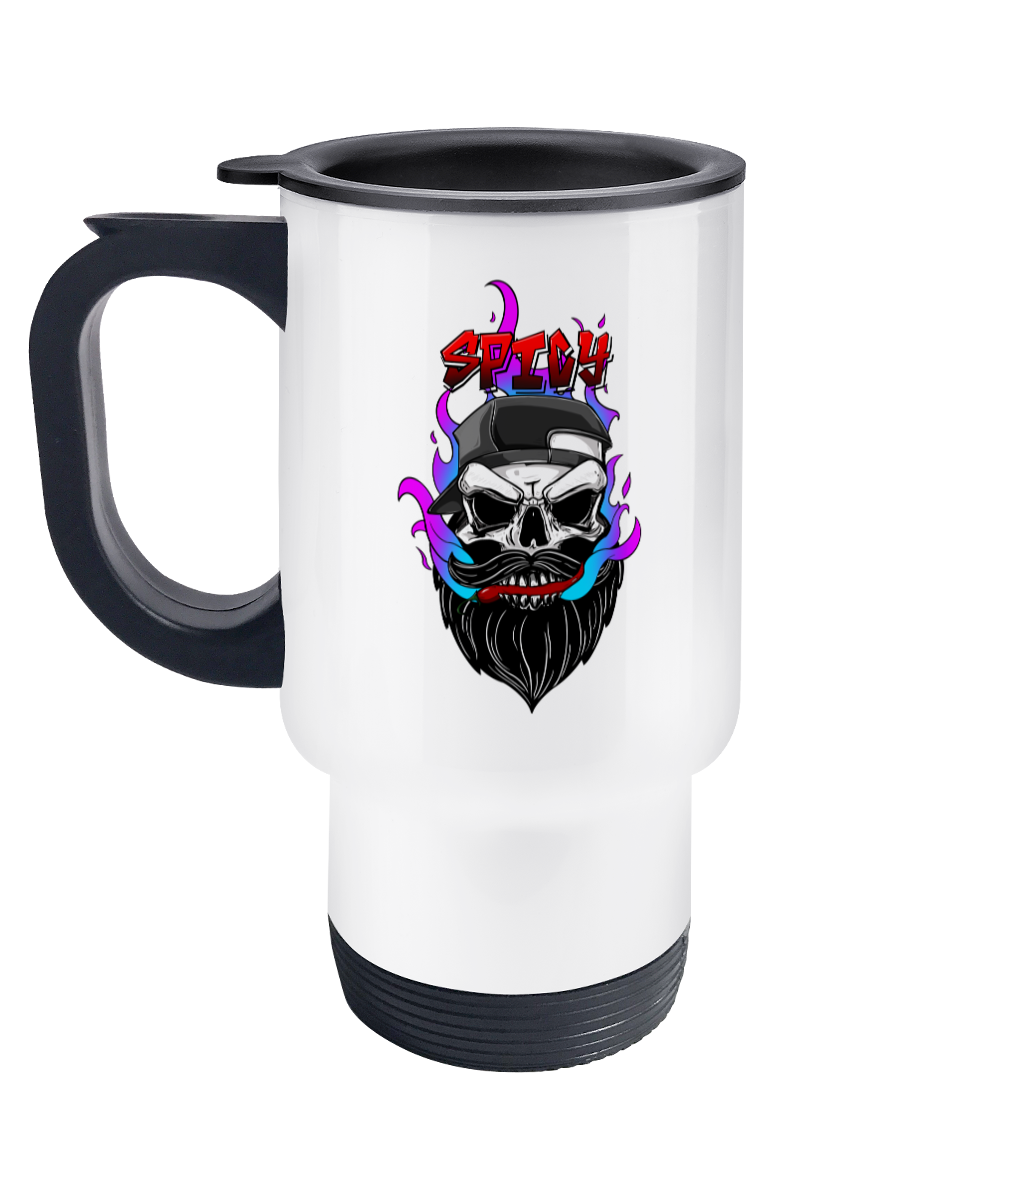 The Bropher's Grimm Spicy Travel Mug